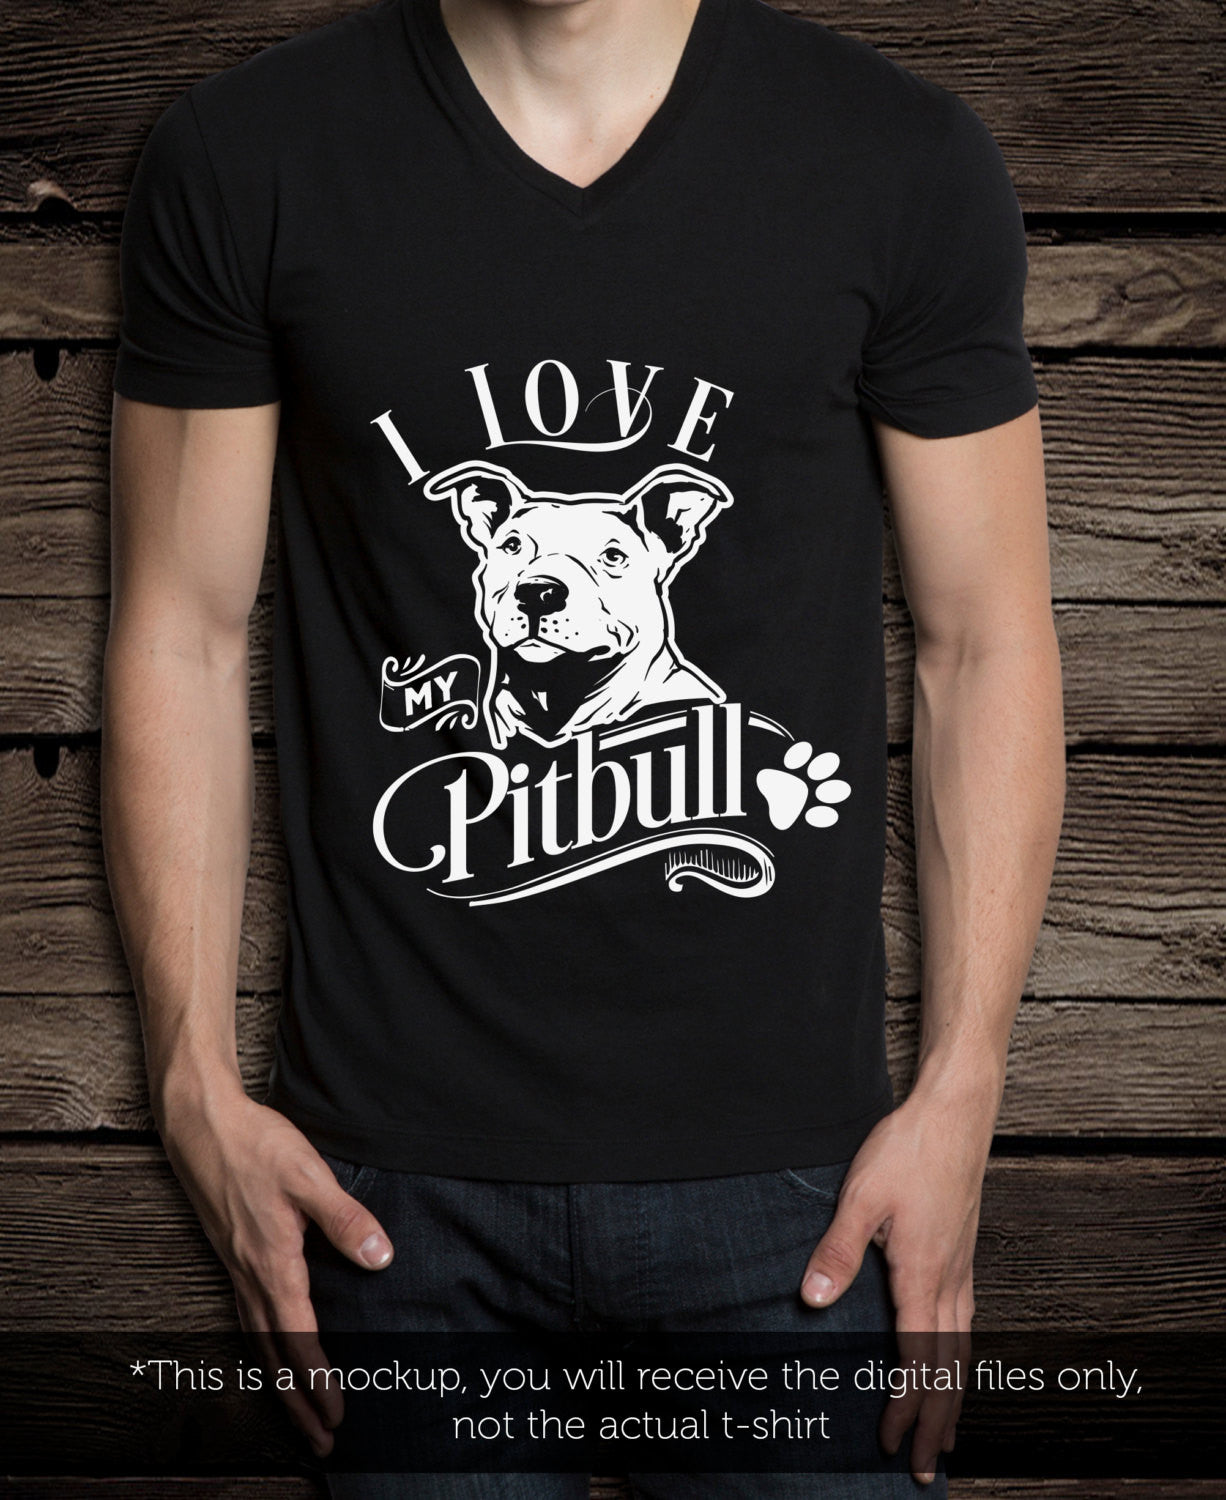 I love my Pitbull -  SVG file Cutting File Clipart in Svg, Eps, Dxf, Png for Cricut & Silhouette - BlackCatsSVG